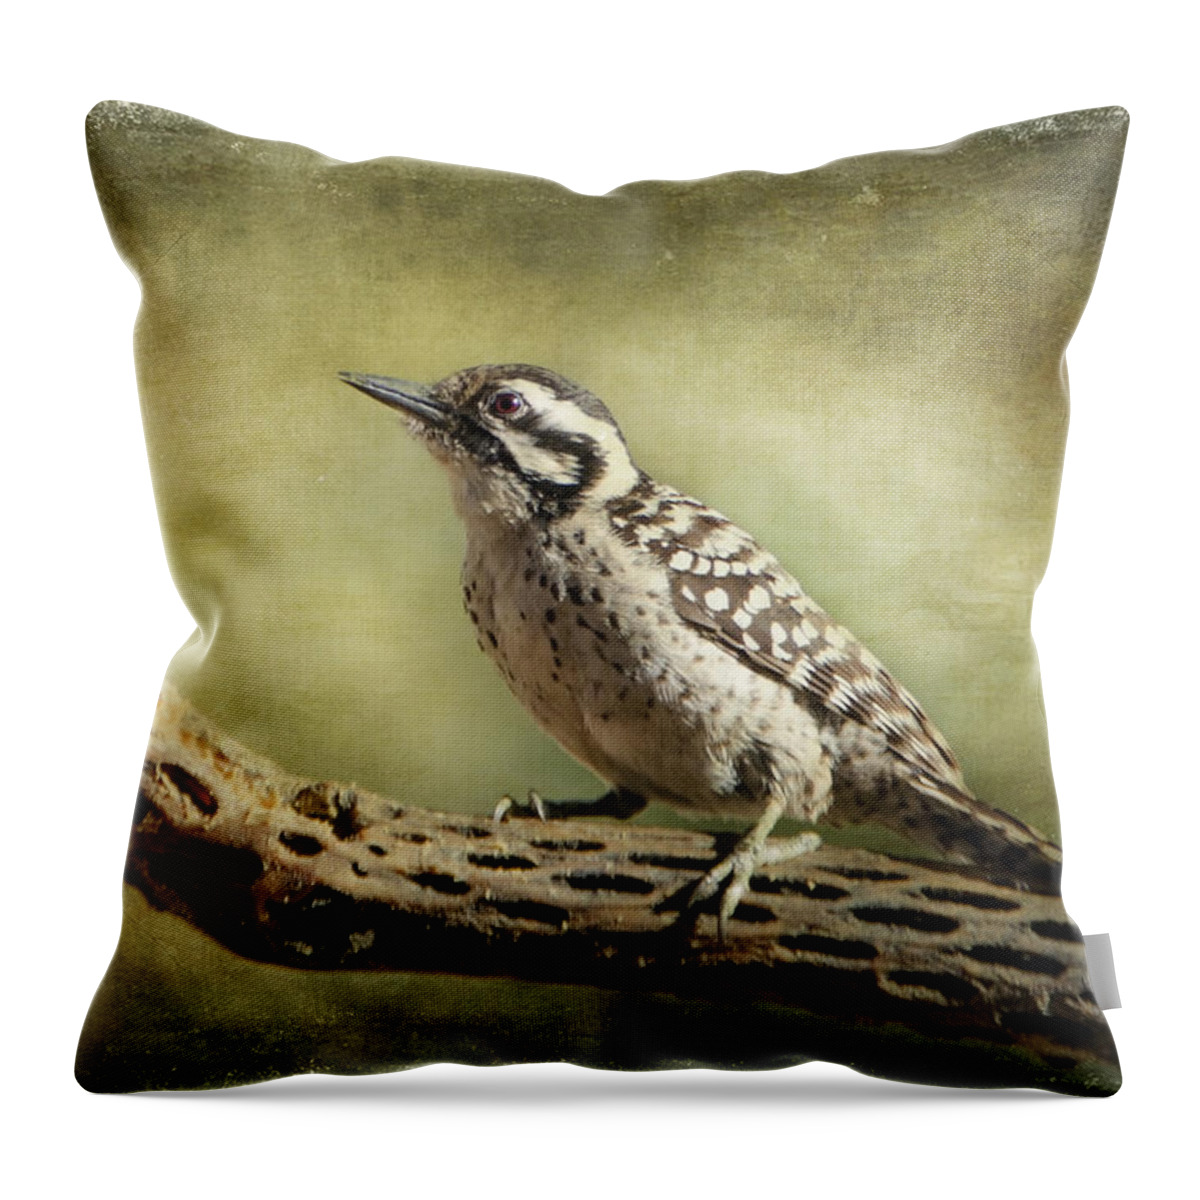 Ladder-backed Woodpecker Throw Pillow featuring the photograph Ladder-backed Woodpecker by Barbara Manis